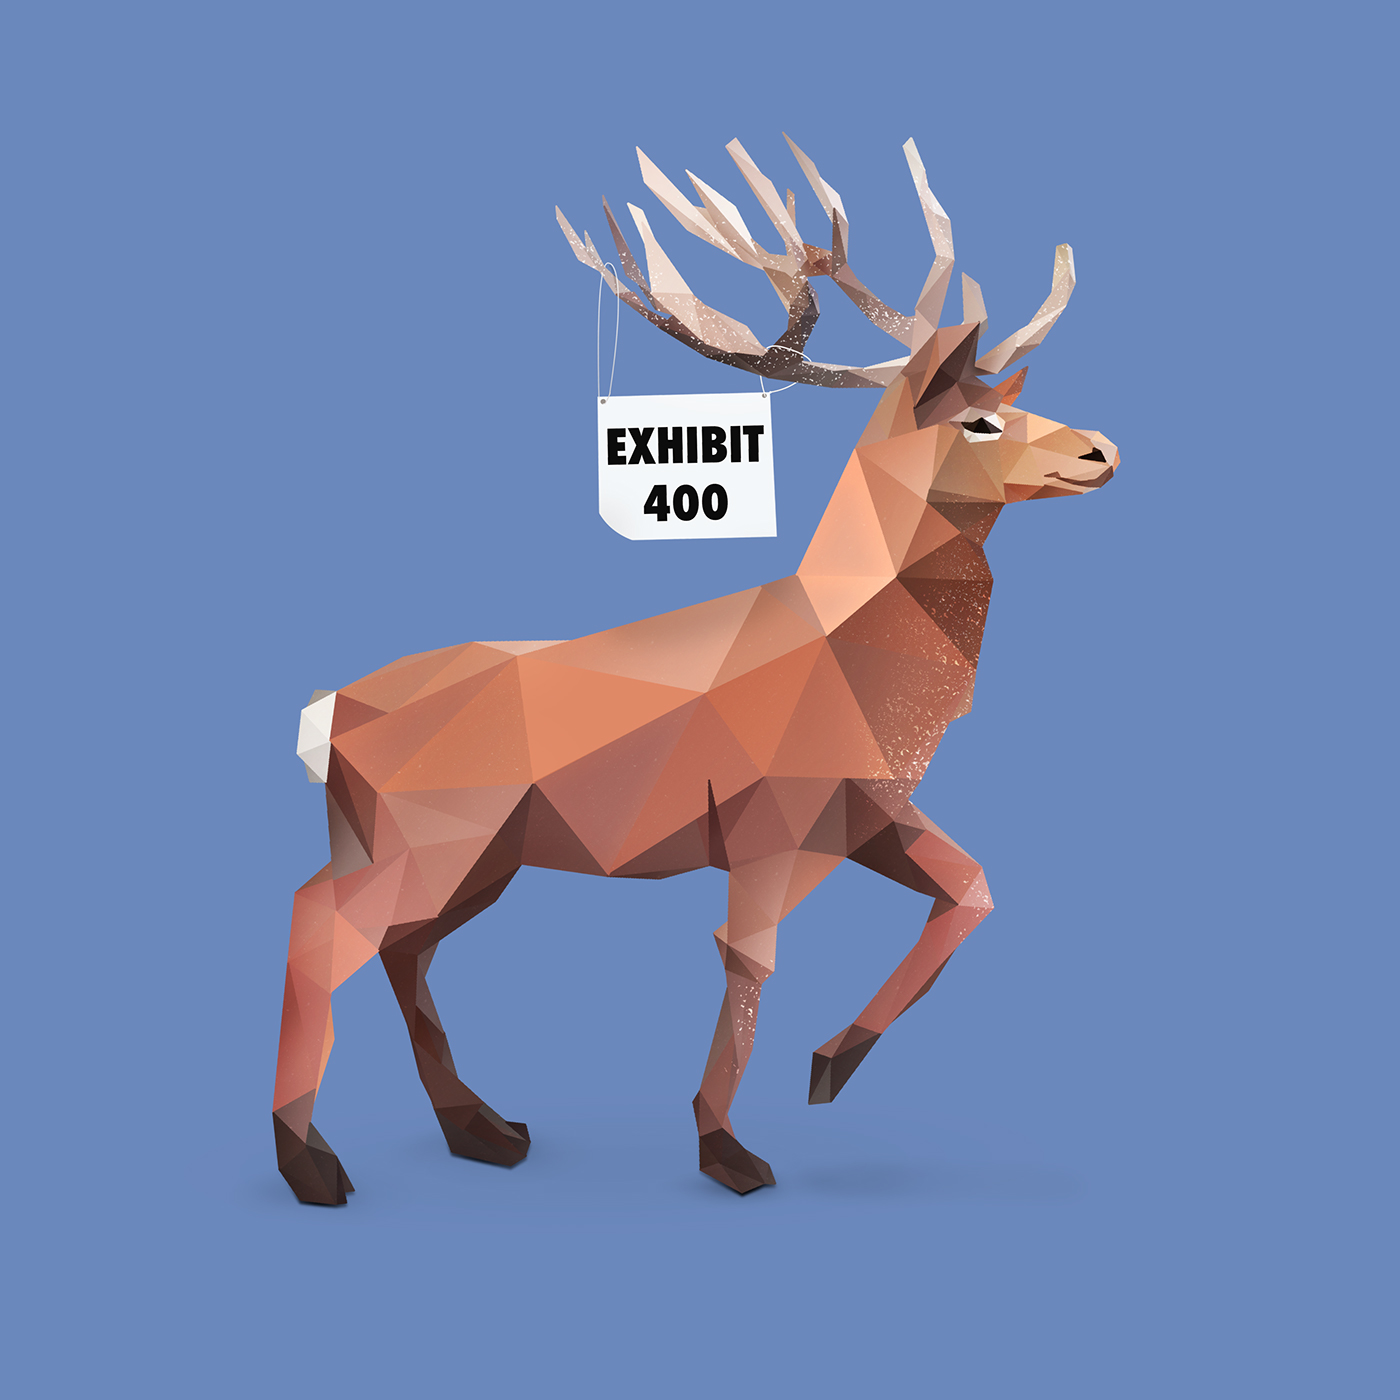 Low Poly low polygon Low Poly Art animals fawn deer elk vector art forest animal photoshopcc